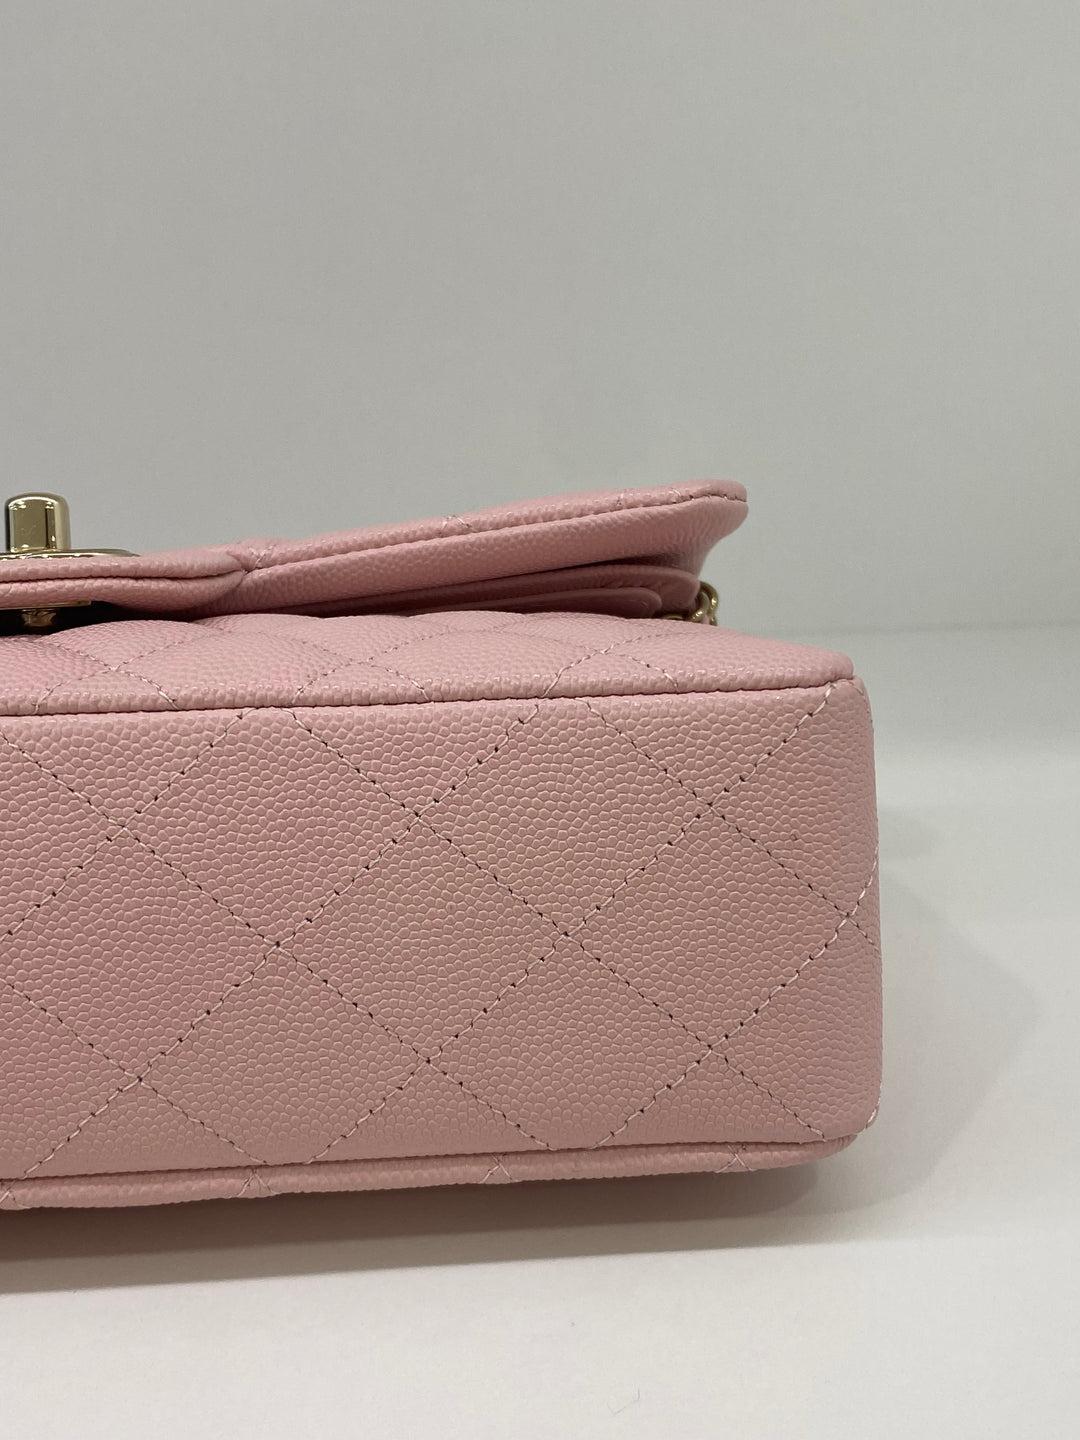 Chanel Classic Flap Small Soft Pink CGHW en vente 7